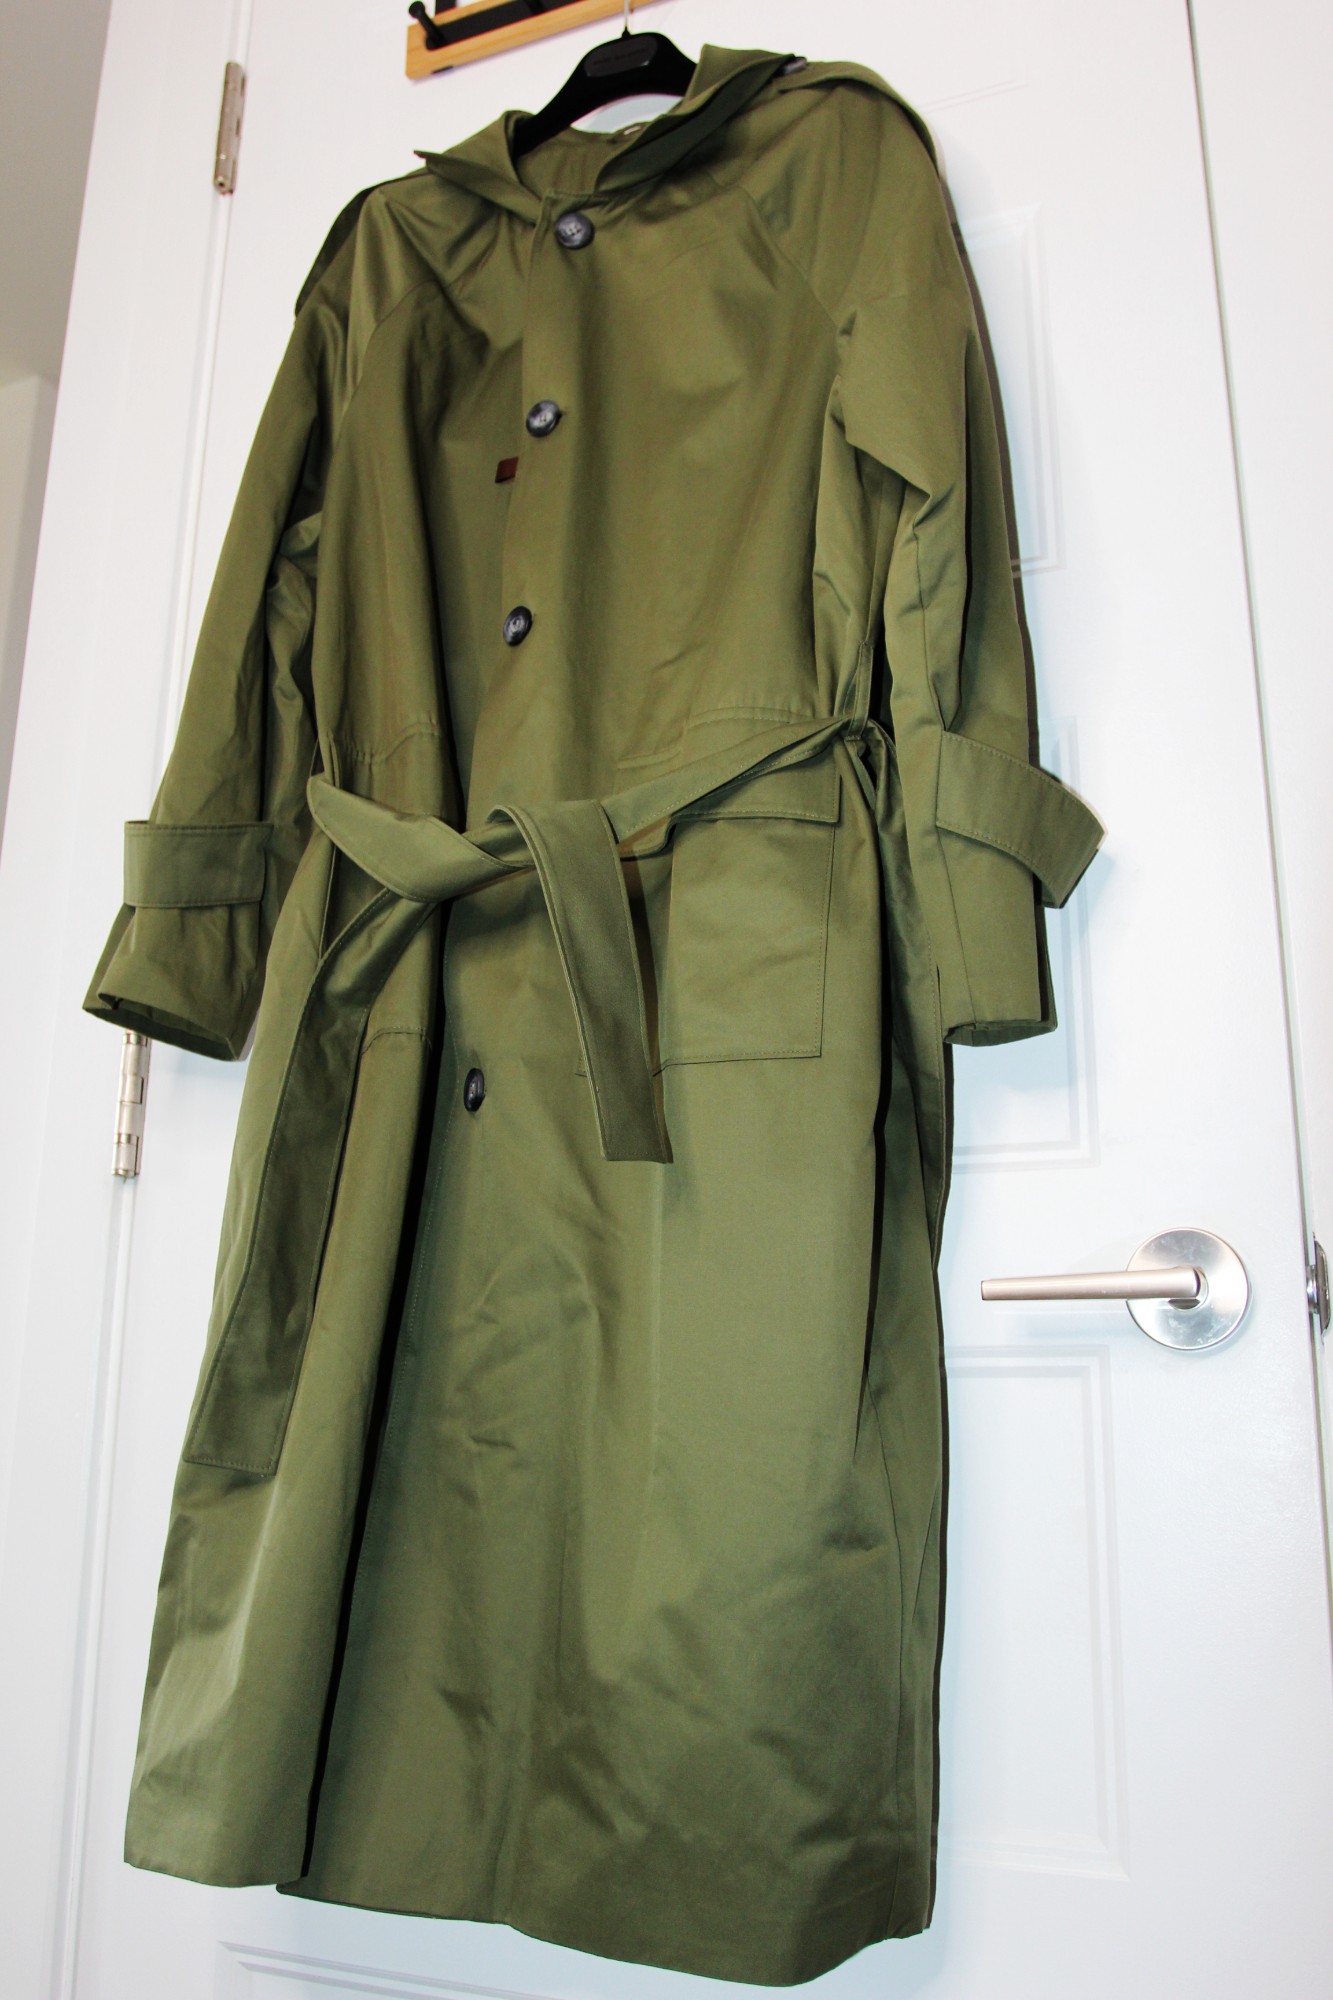 BNWT SS23 BY THE OAK BELTED LONG TRENCH COAT XL - 6